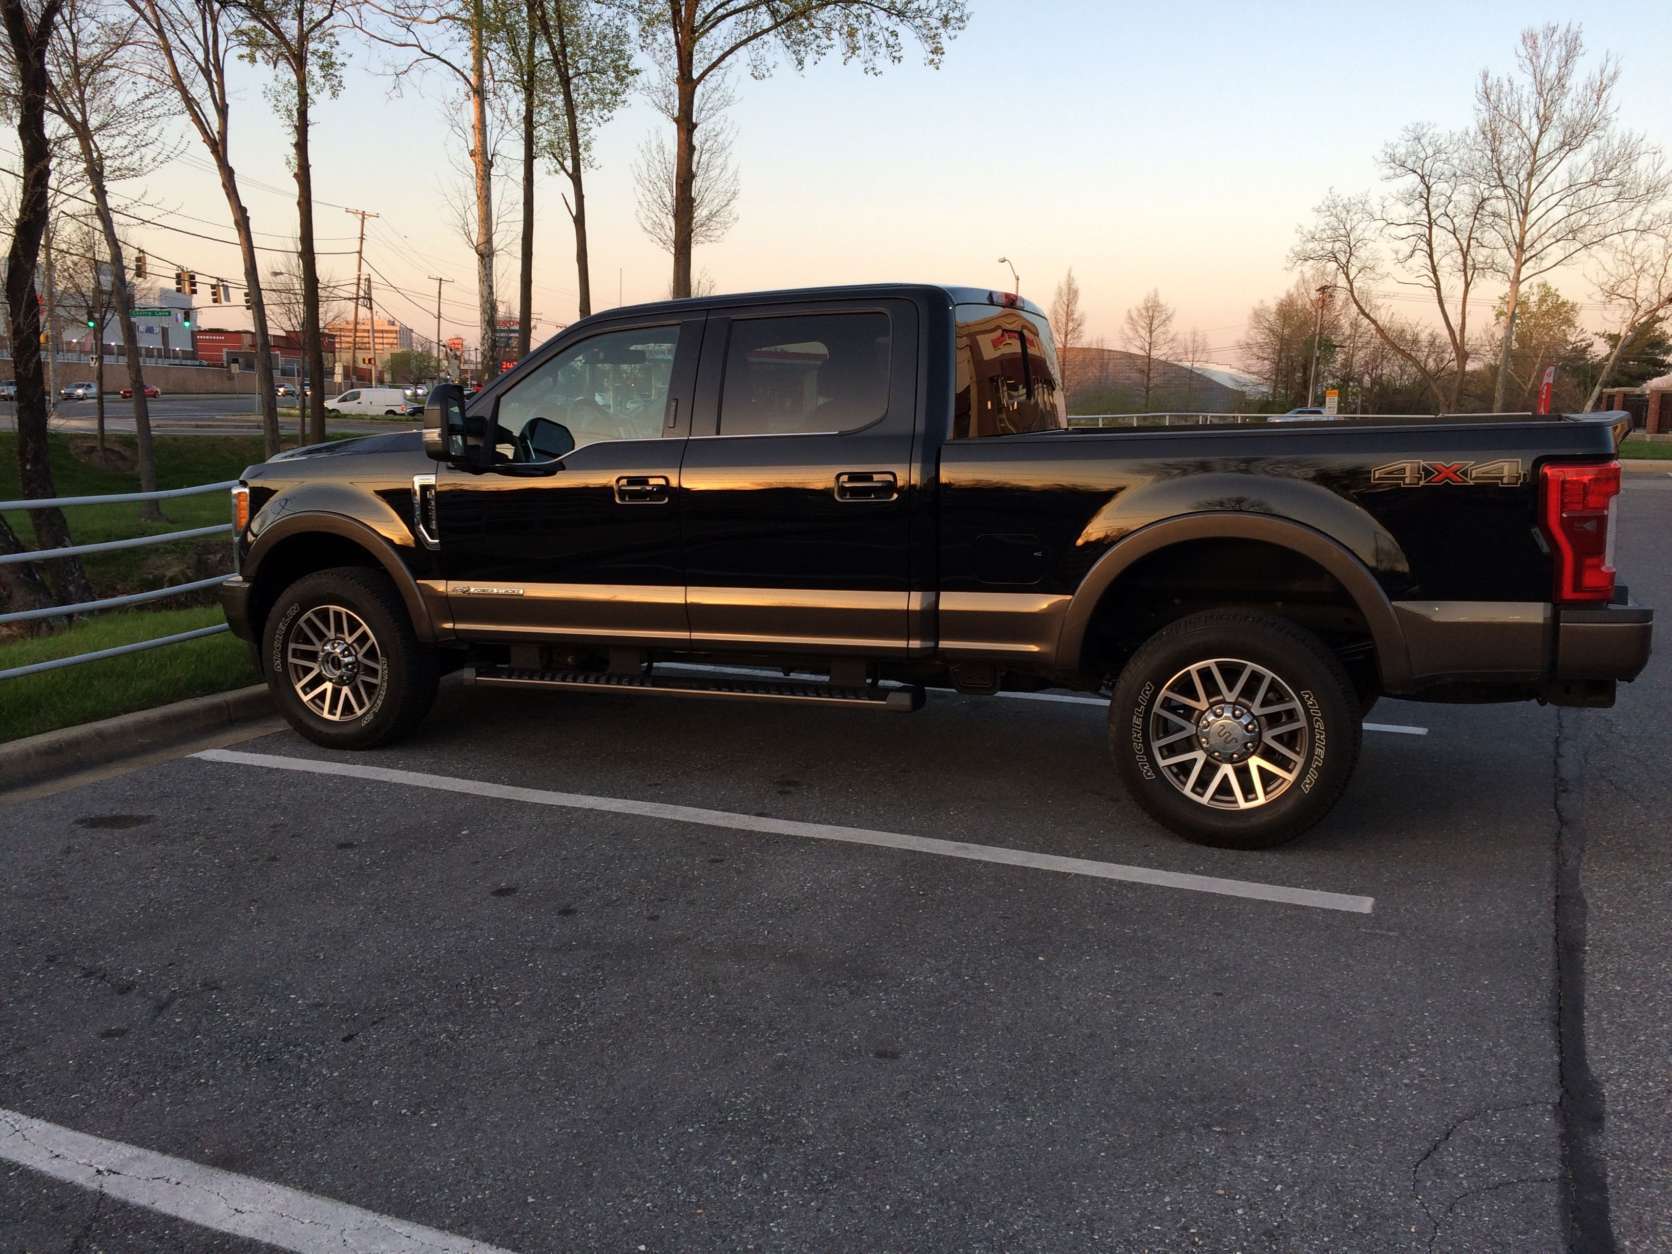 Car Review: Ford Super Duty F-250 is ready for tough work - WTOP News